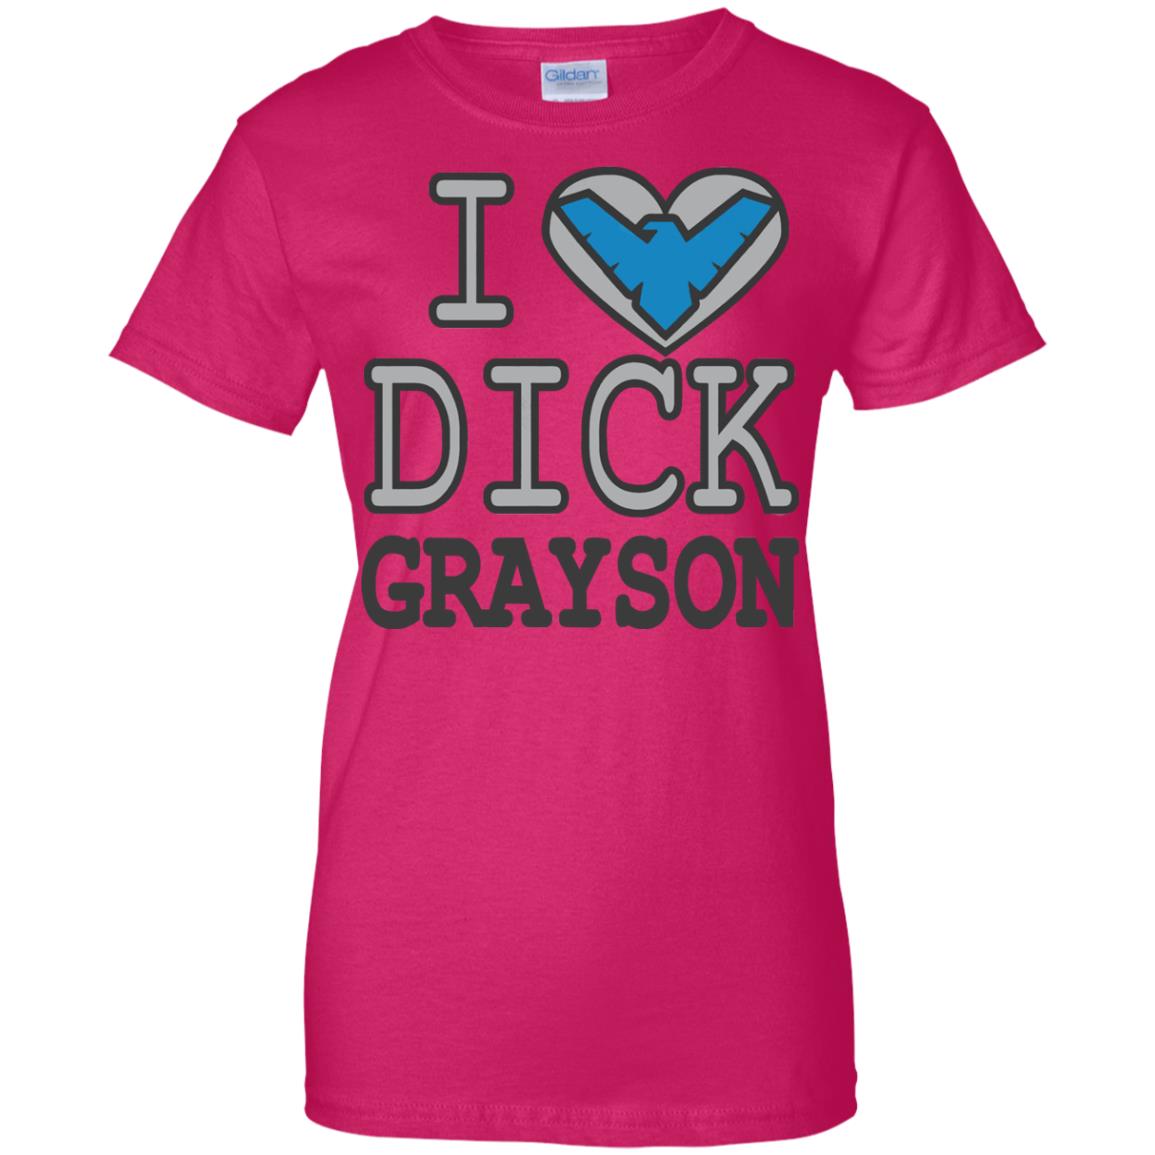 dick grayson womens t shirt - lady t shirt - pink heliconia